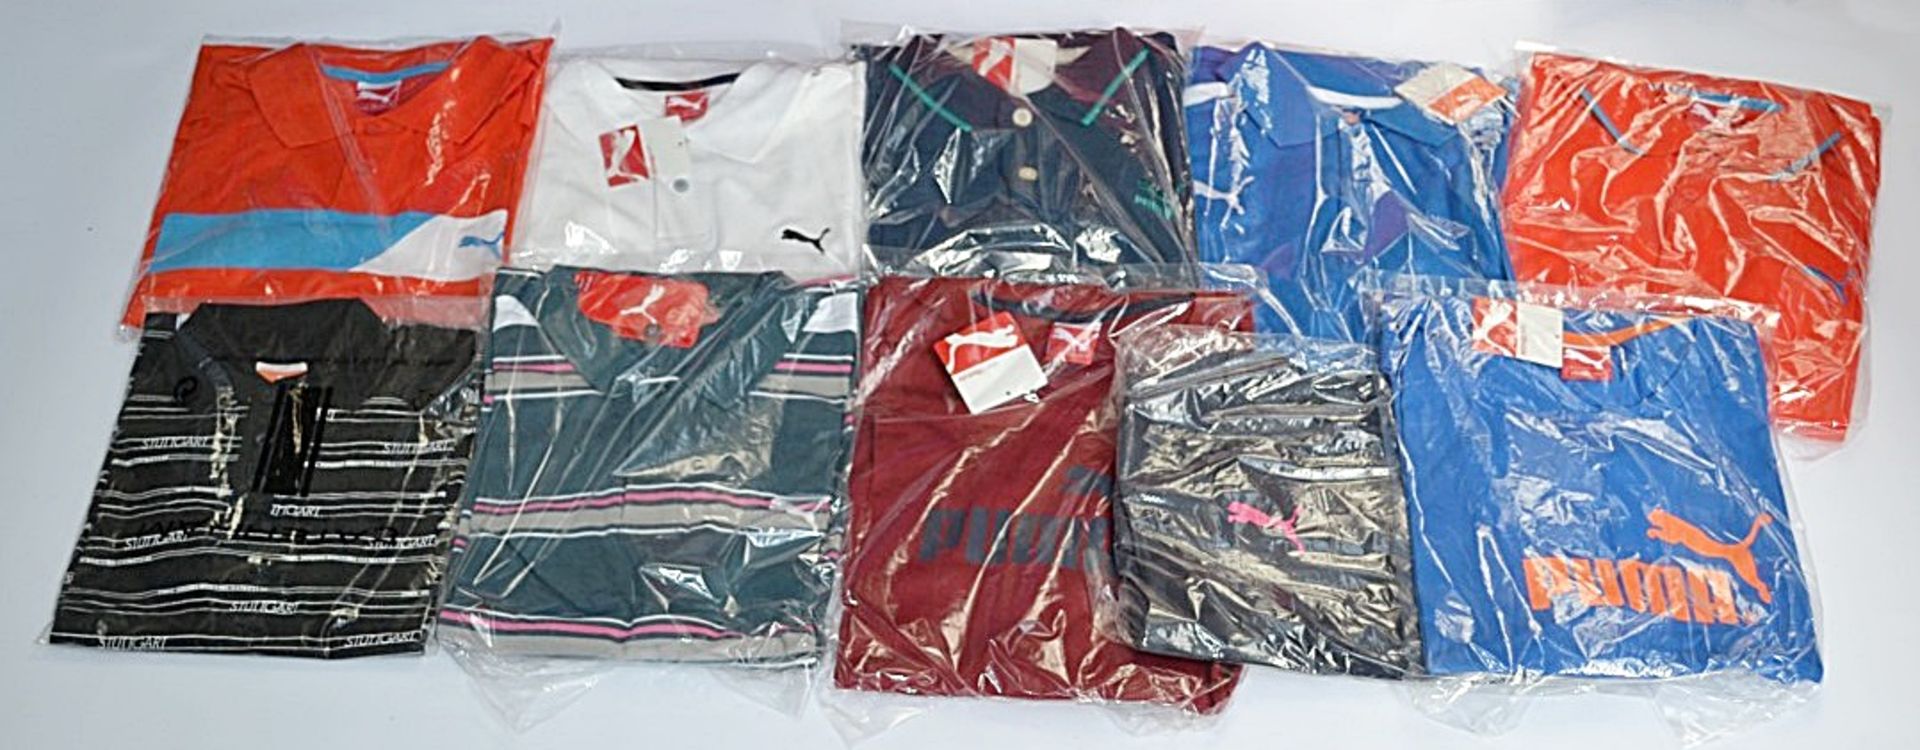 10 x Assorted PUMA Branded T-Shirts & Vests - Various Sizes: Mostly Adult Large - New With Tags -